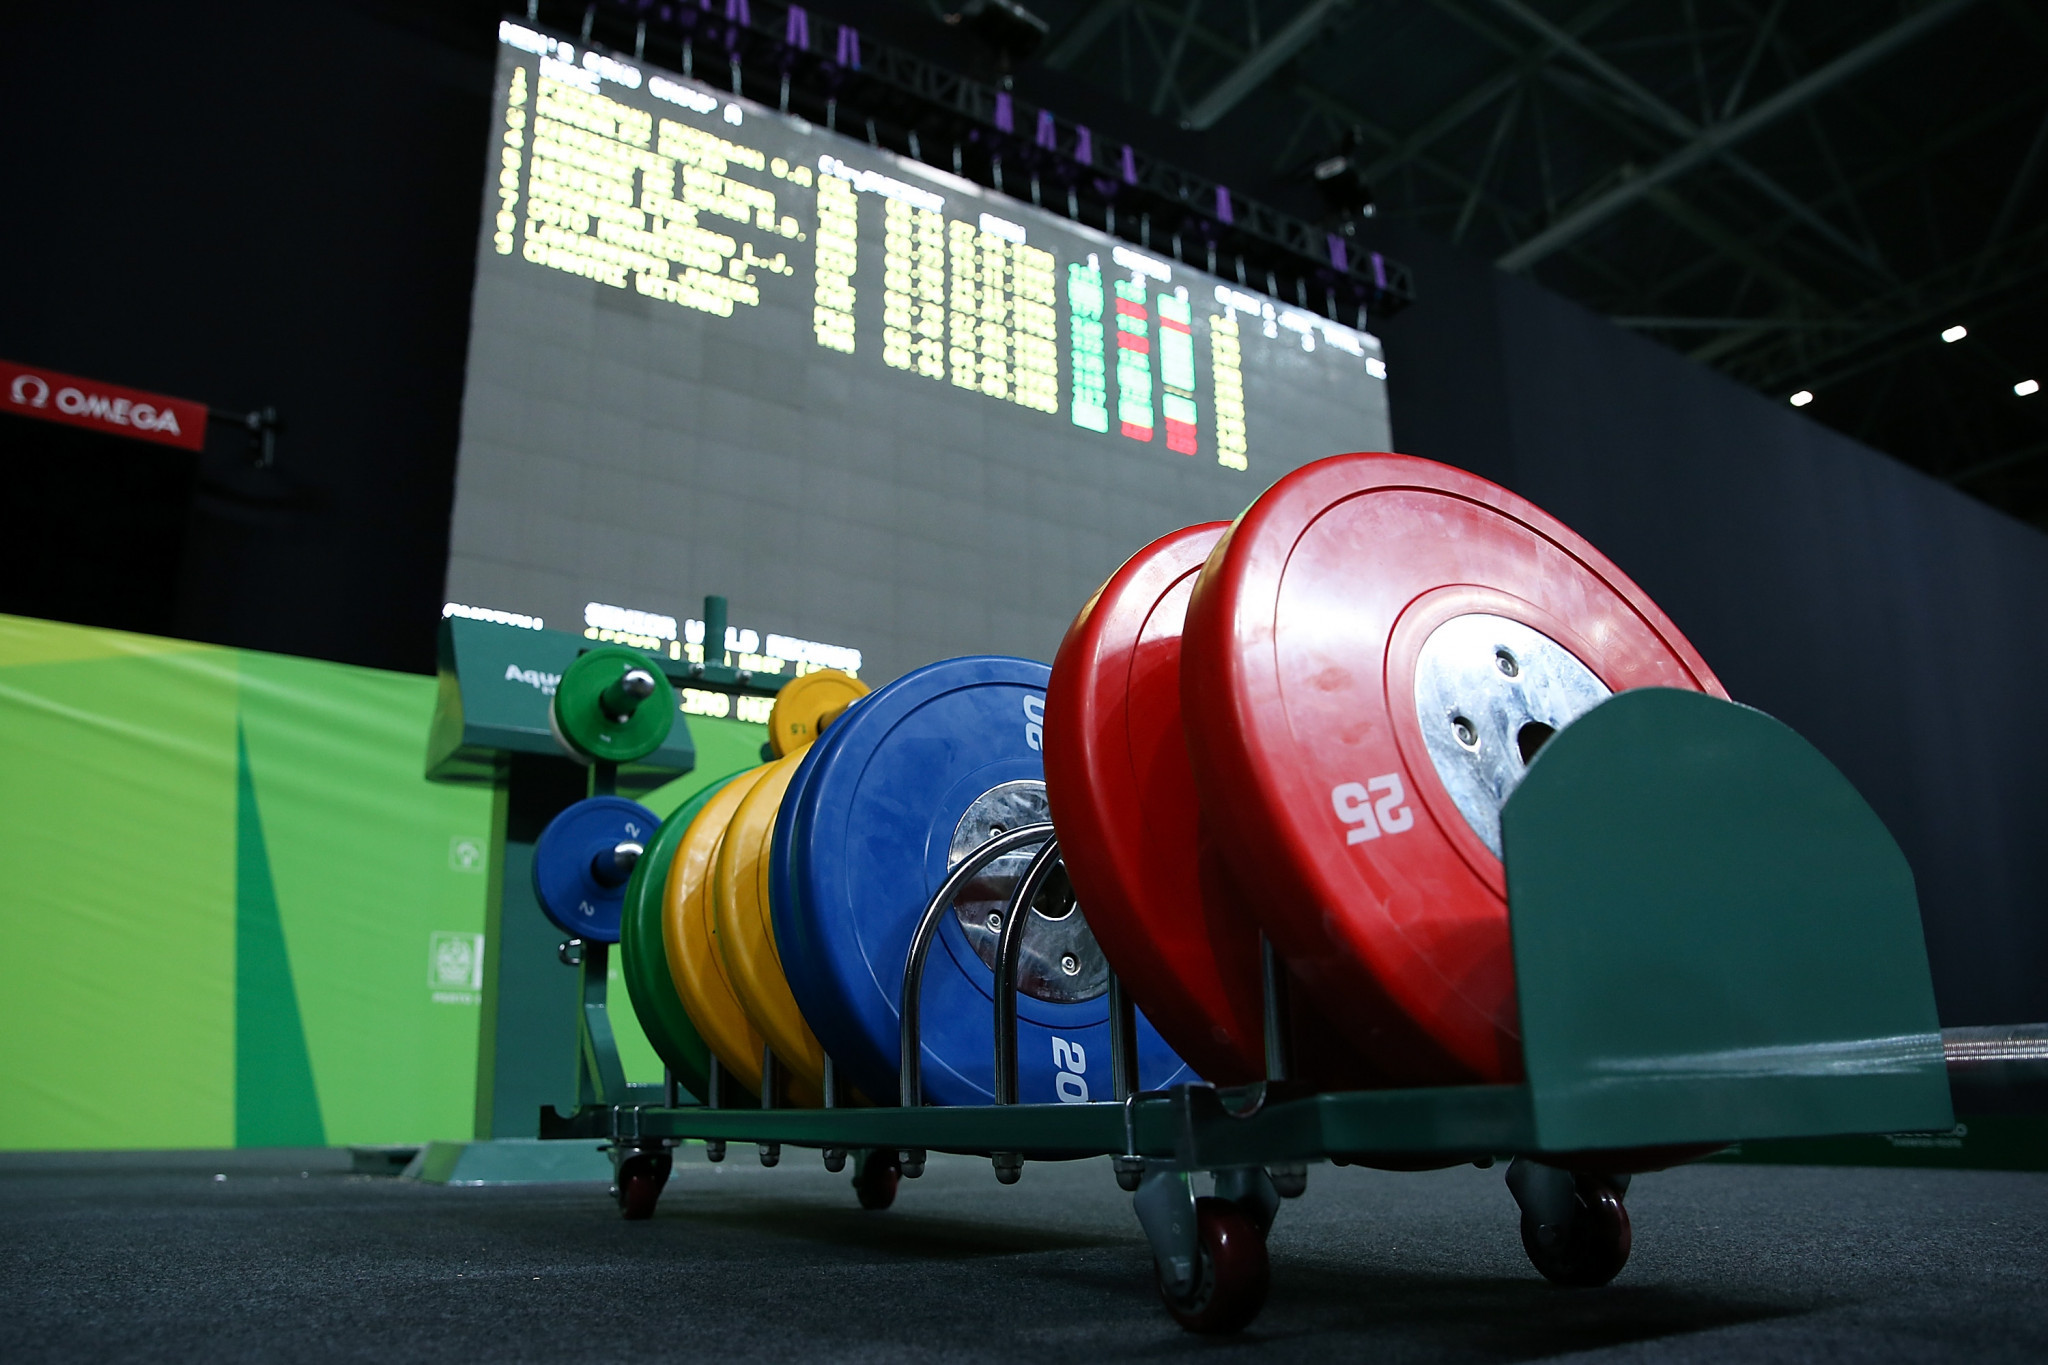 Weightlifting has been restored to the Olympic schedule for the foreseeable future ©Getty Images